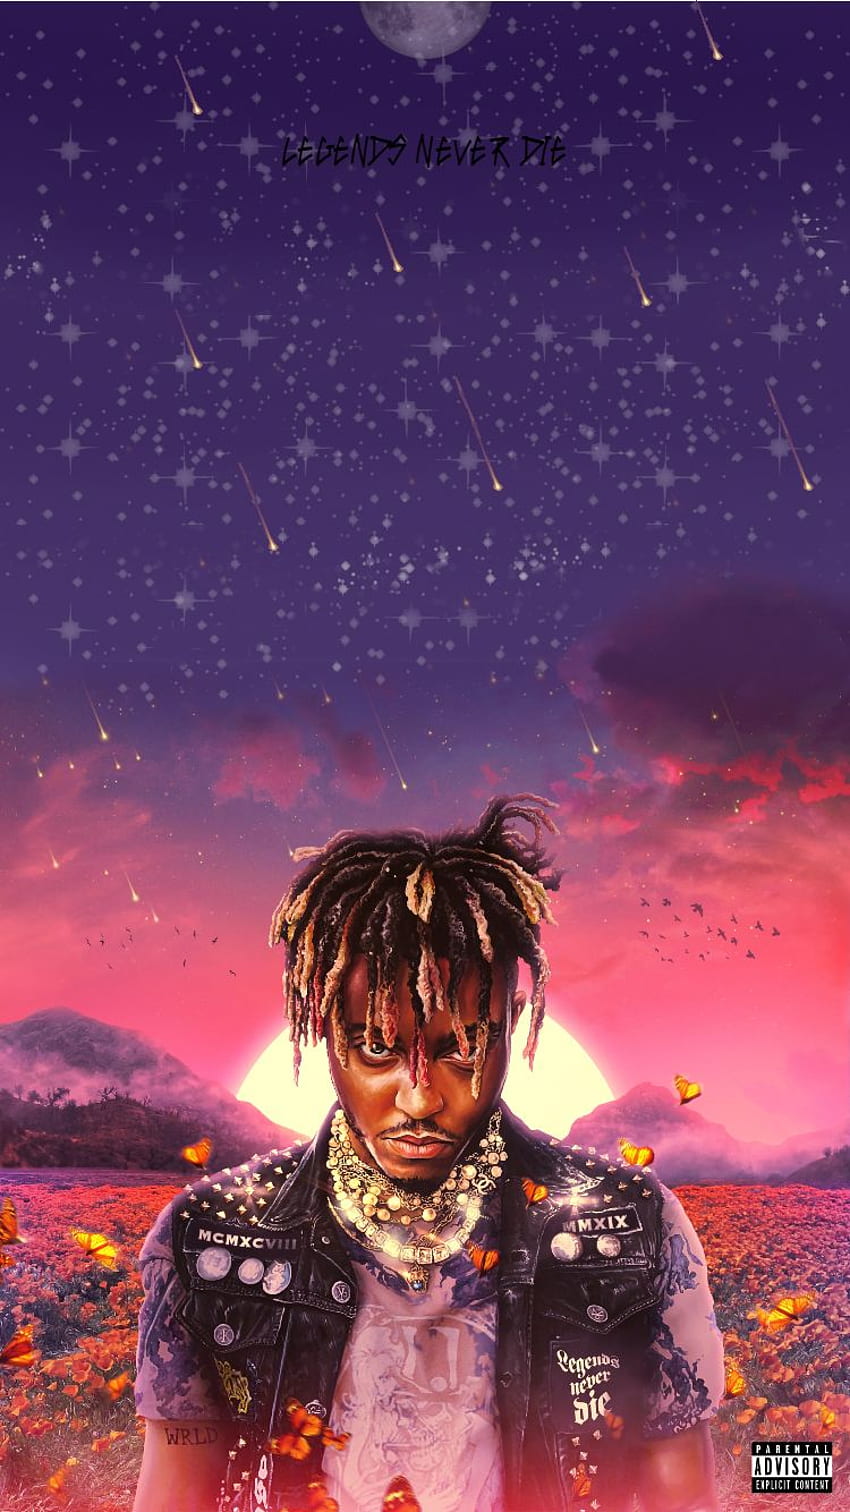 I know this isn't Ski Mask Related, but I wanted to show this off. Turned Juice's new album cover into a .: SlumpGod, Mask off HD phone wallpaper